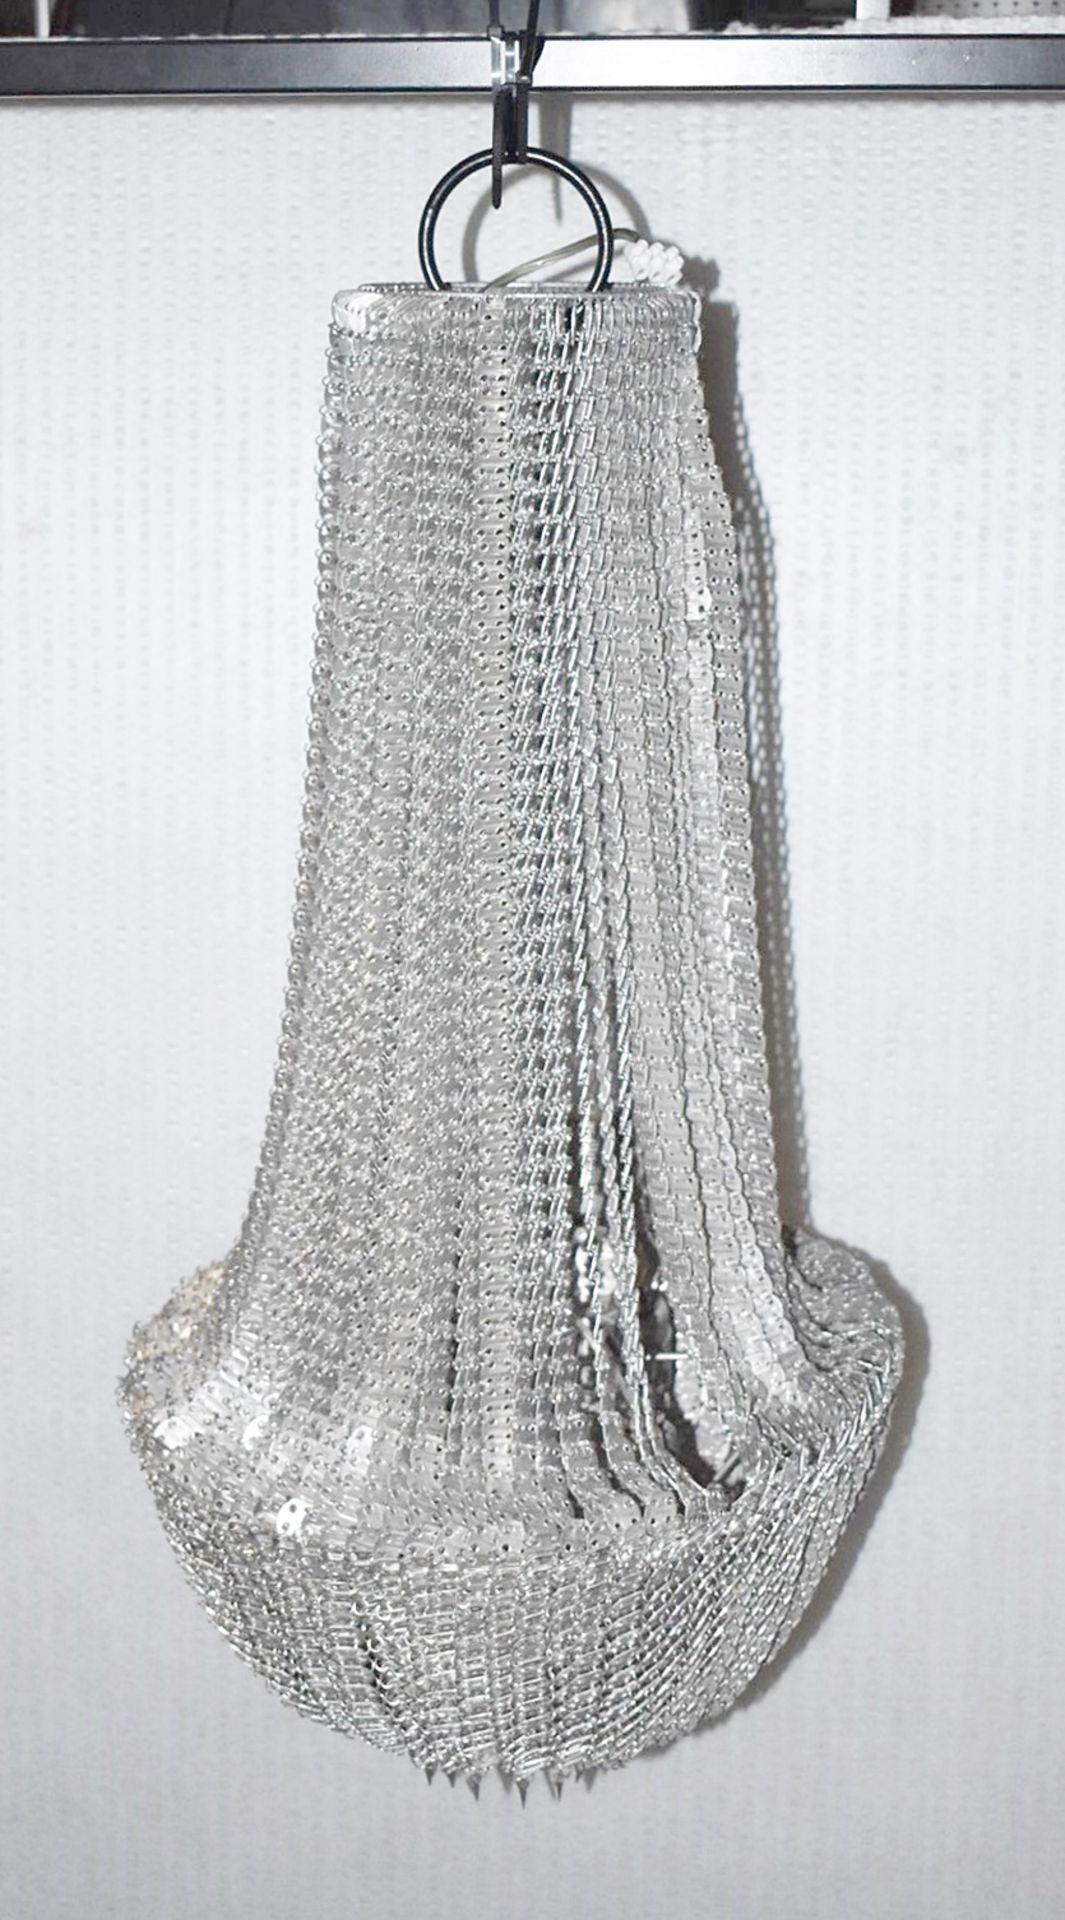 1 x Opulent Chainmail Chandelier with Crystal Glass Droplets - Procured From An Exclusive Property